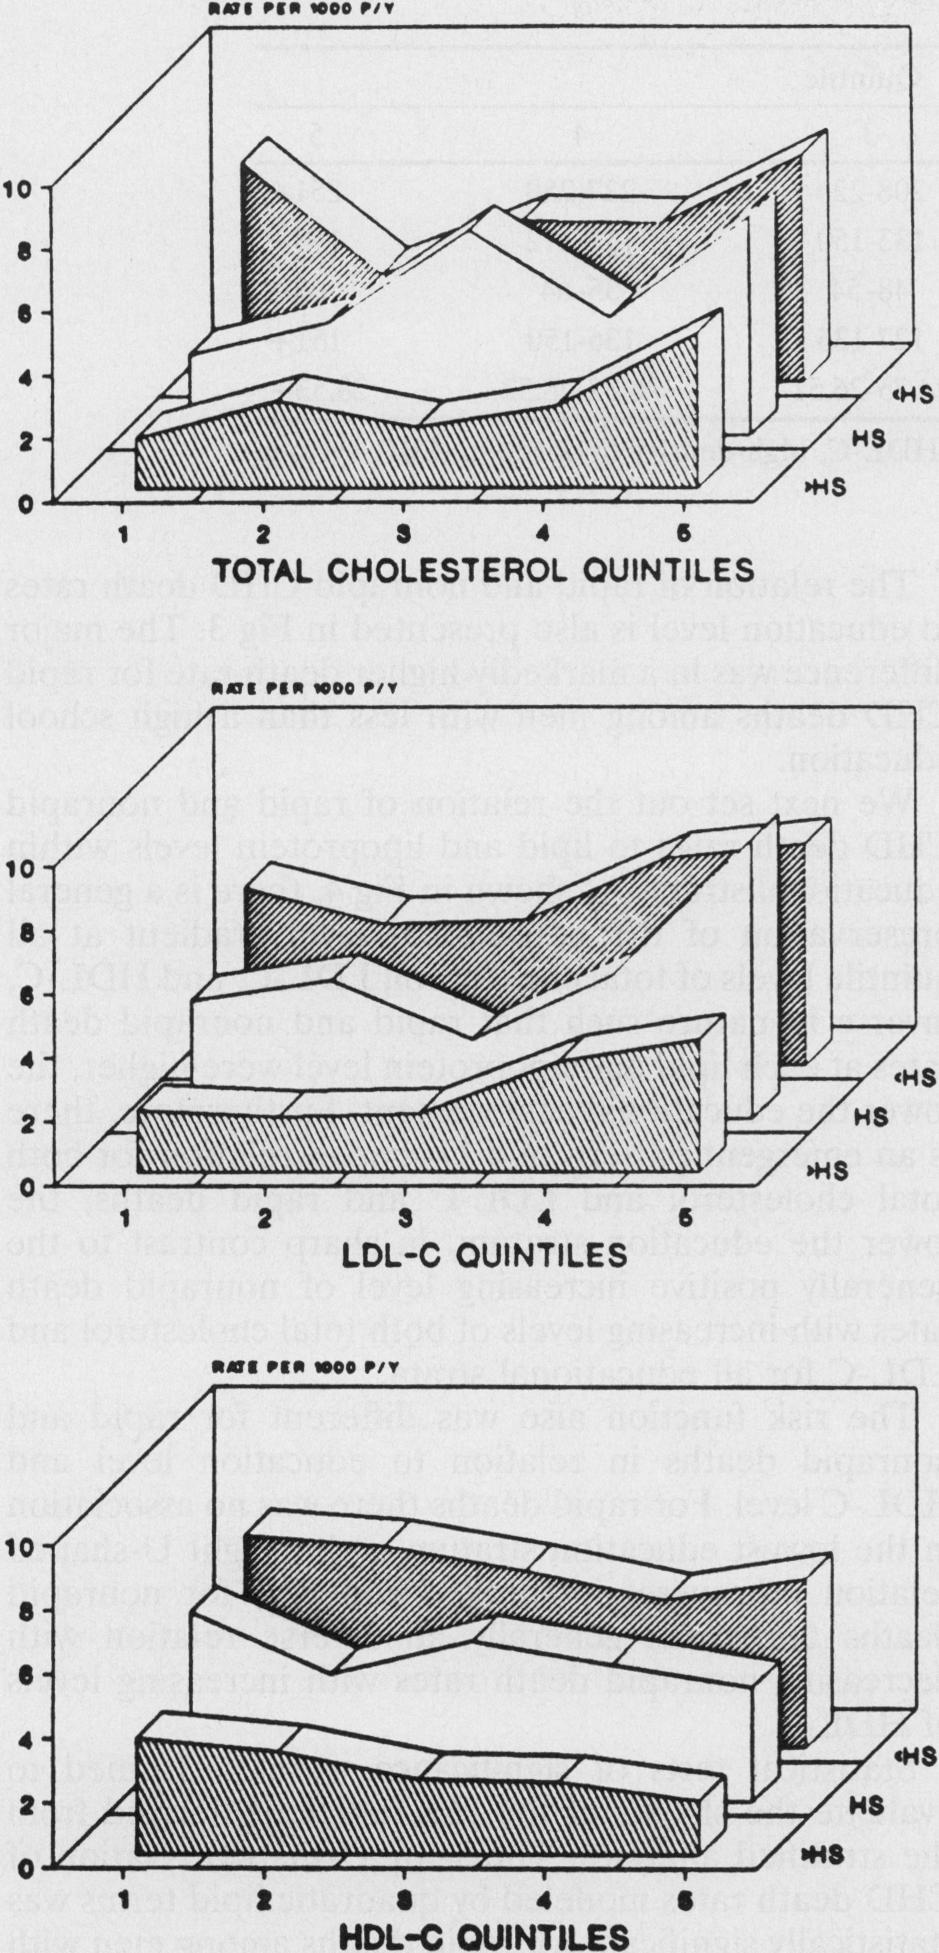 LDL-C indicates low-density liorotein cholesterol; HDL-C, high-density liorotein cholesterol; P1Y, ersonyears; and HS, high school. Rates are shown as er 1000 Ply with nonraid CHD deaths (P<.05).